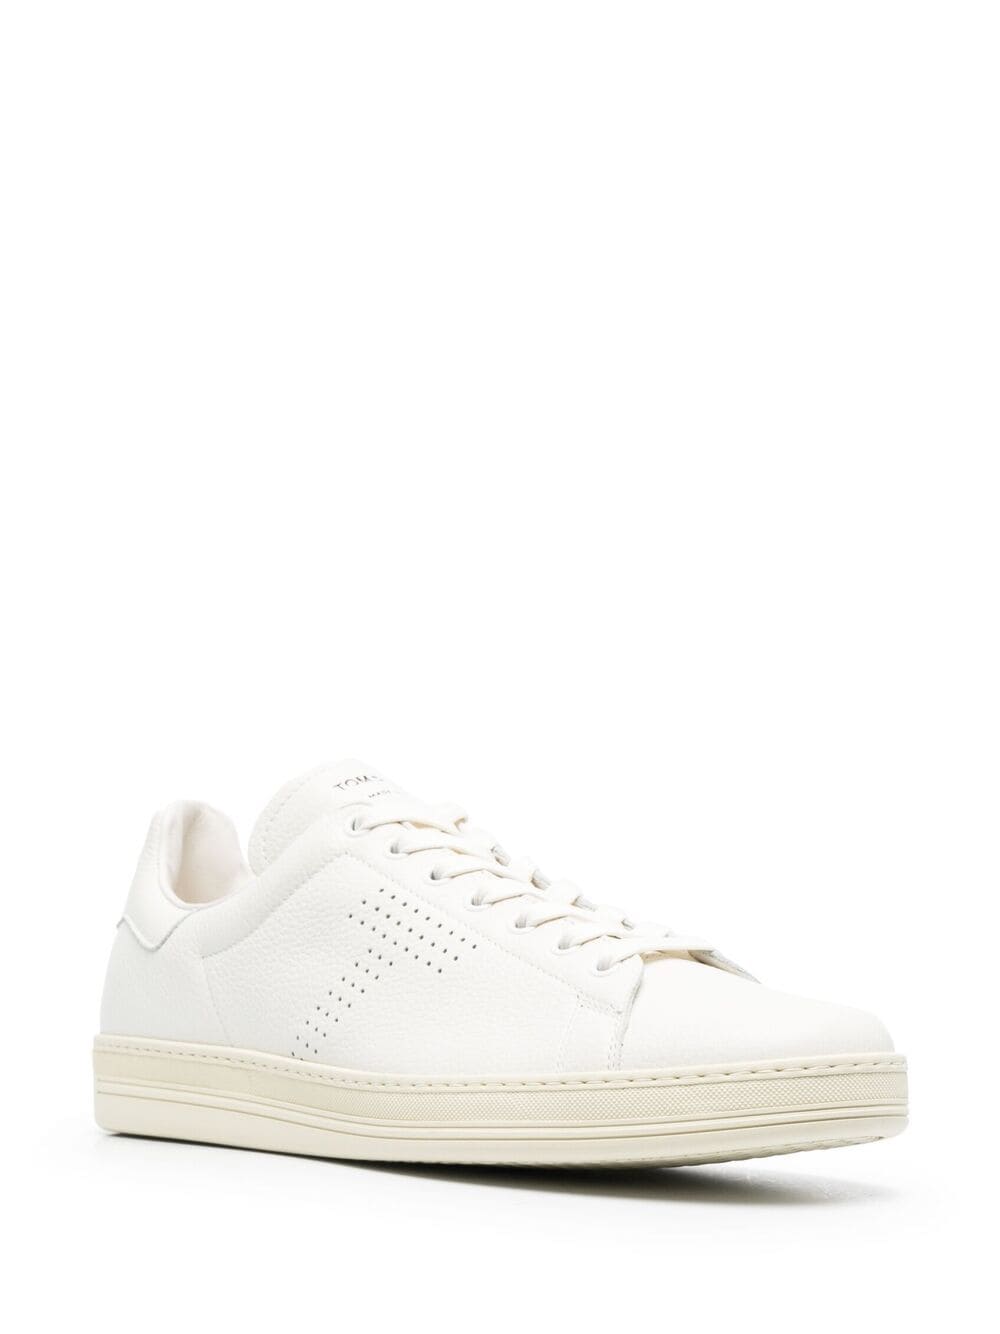 White calf leather punch-hole detail lace-up sneakers